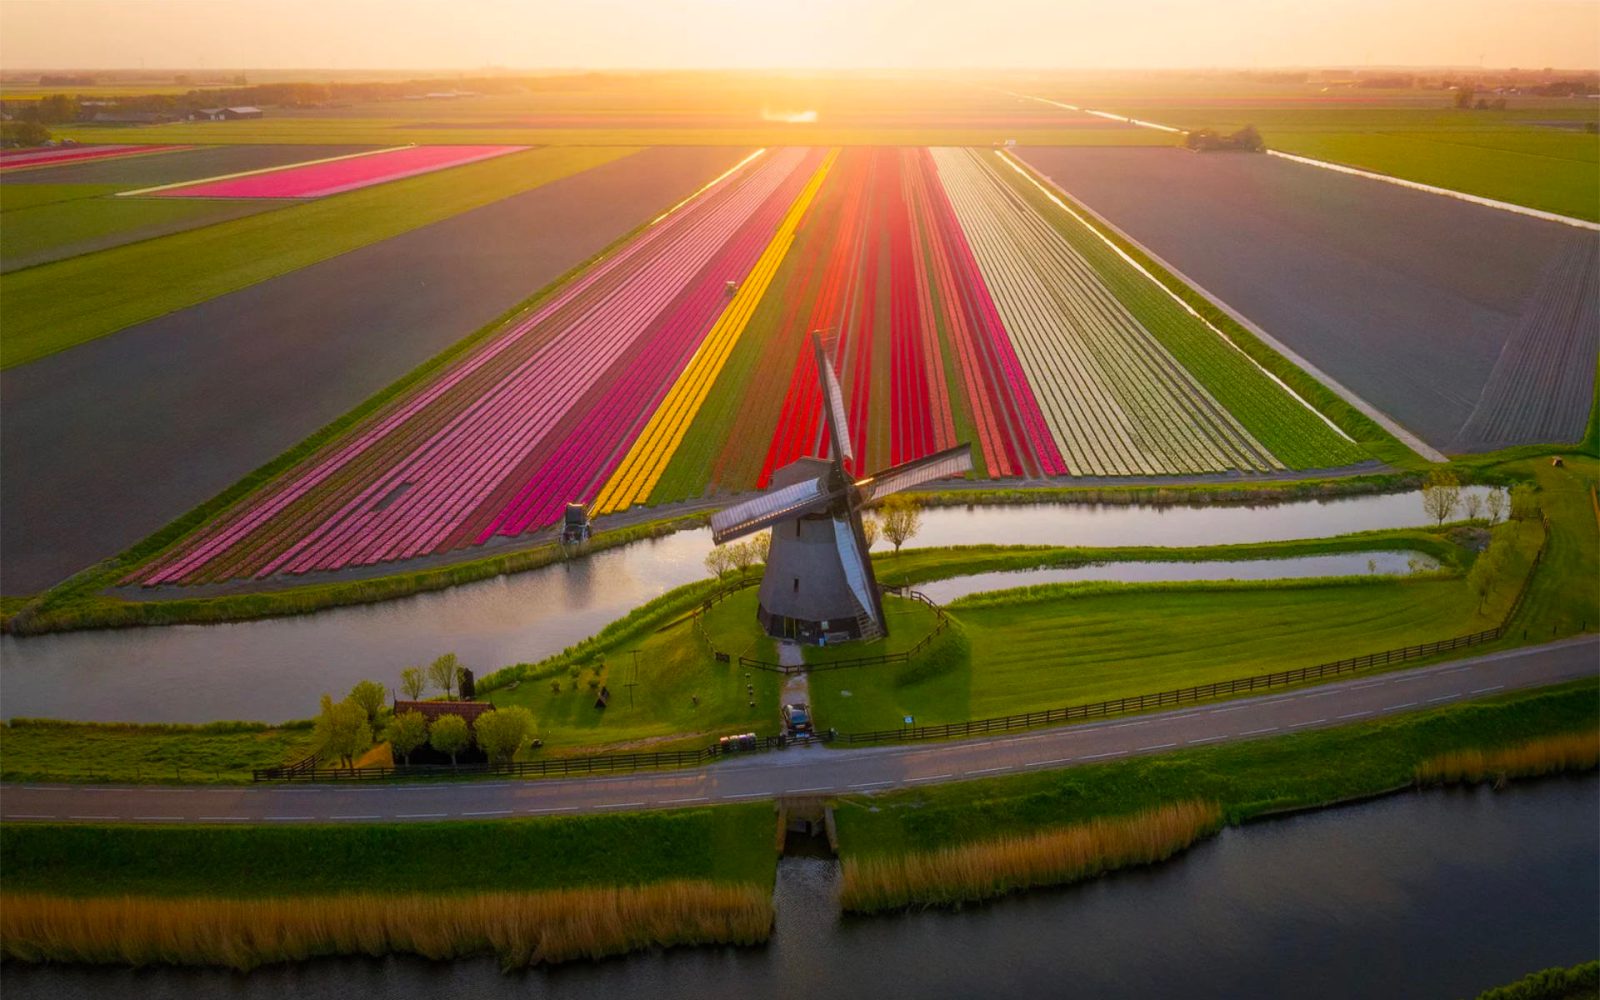 Tips-for-shooting-amazing-drone-photos-from-Dutch-photographer.jpg